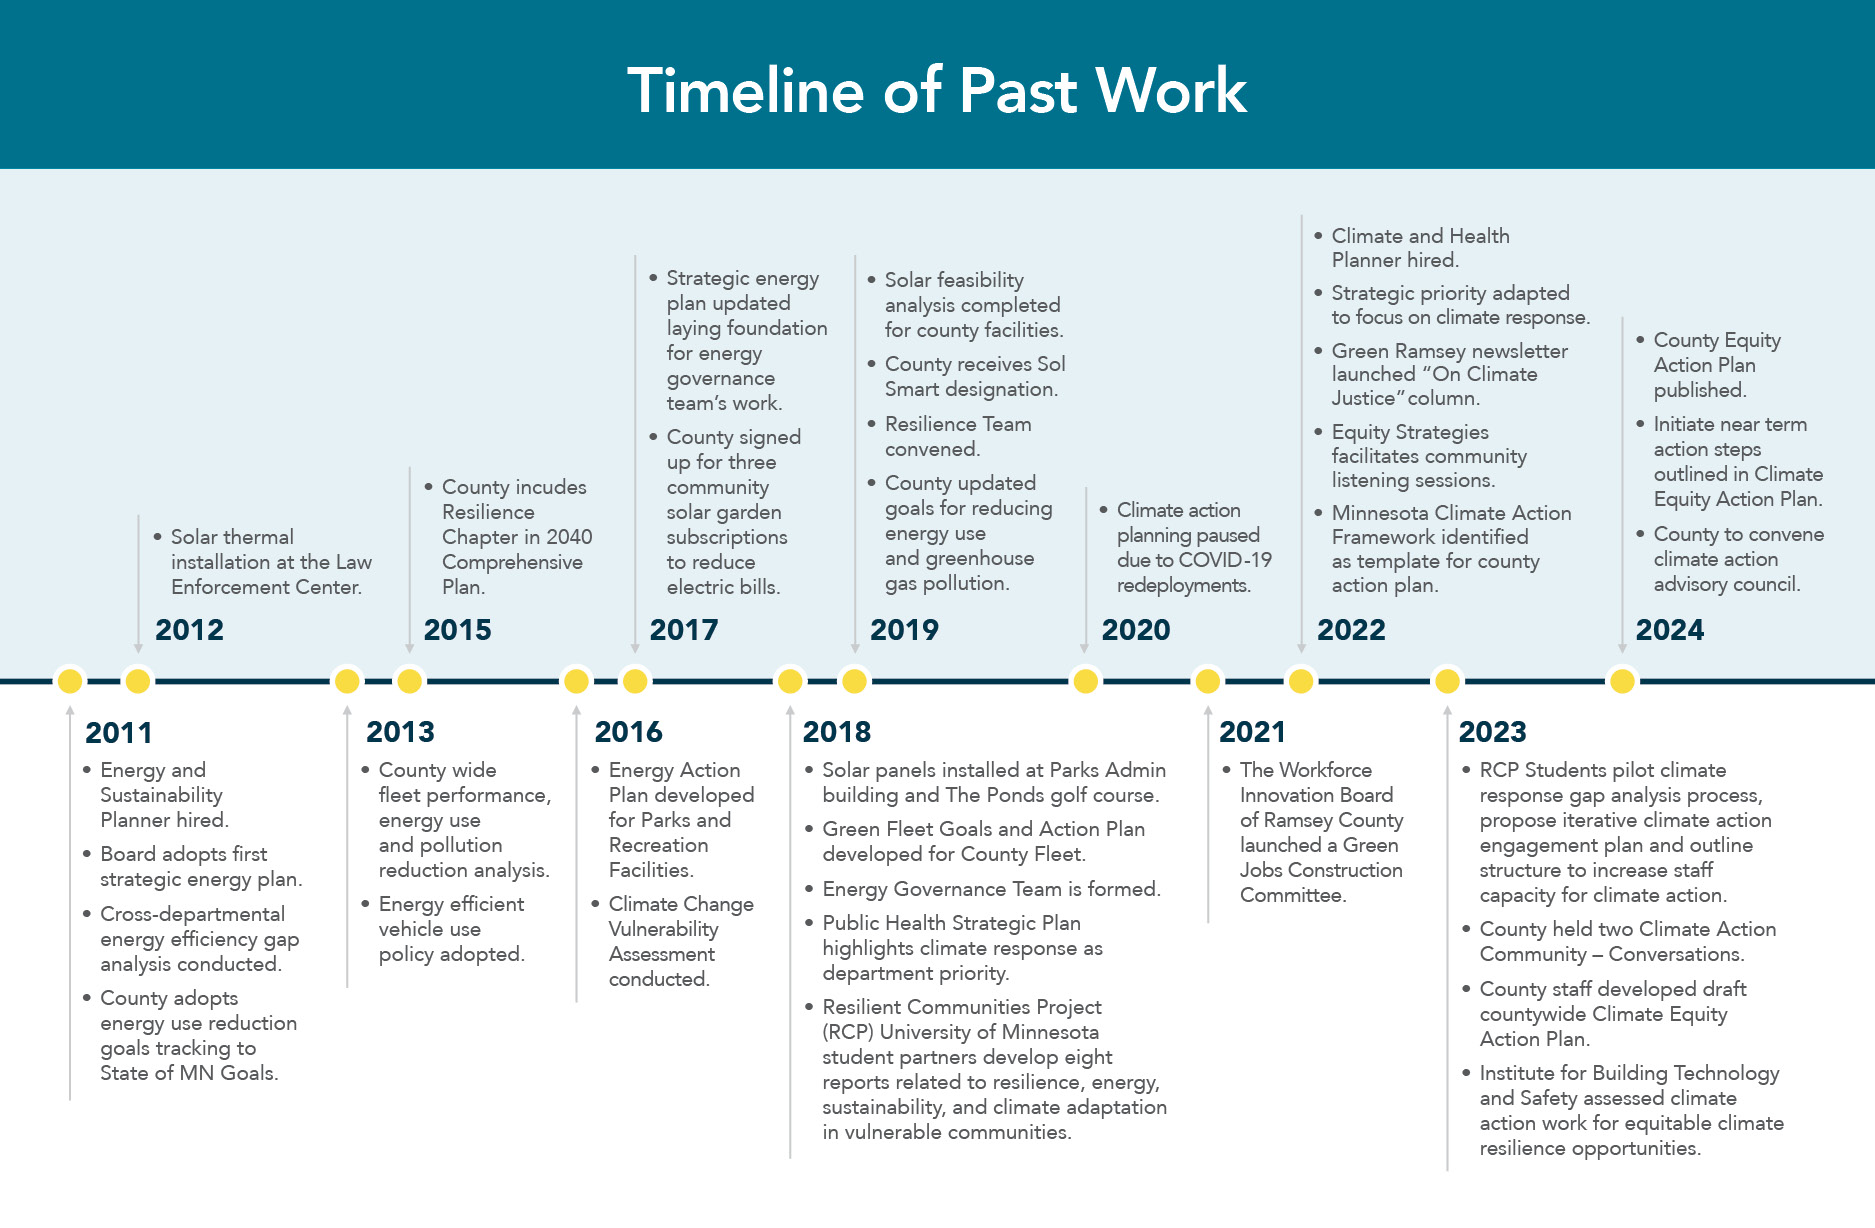 Timeline of past Climate Equity Action Plan work